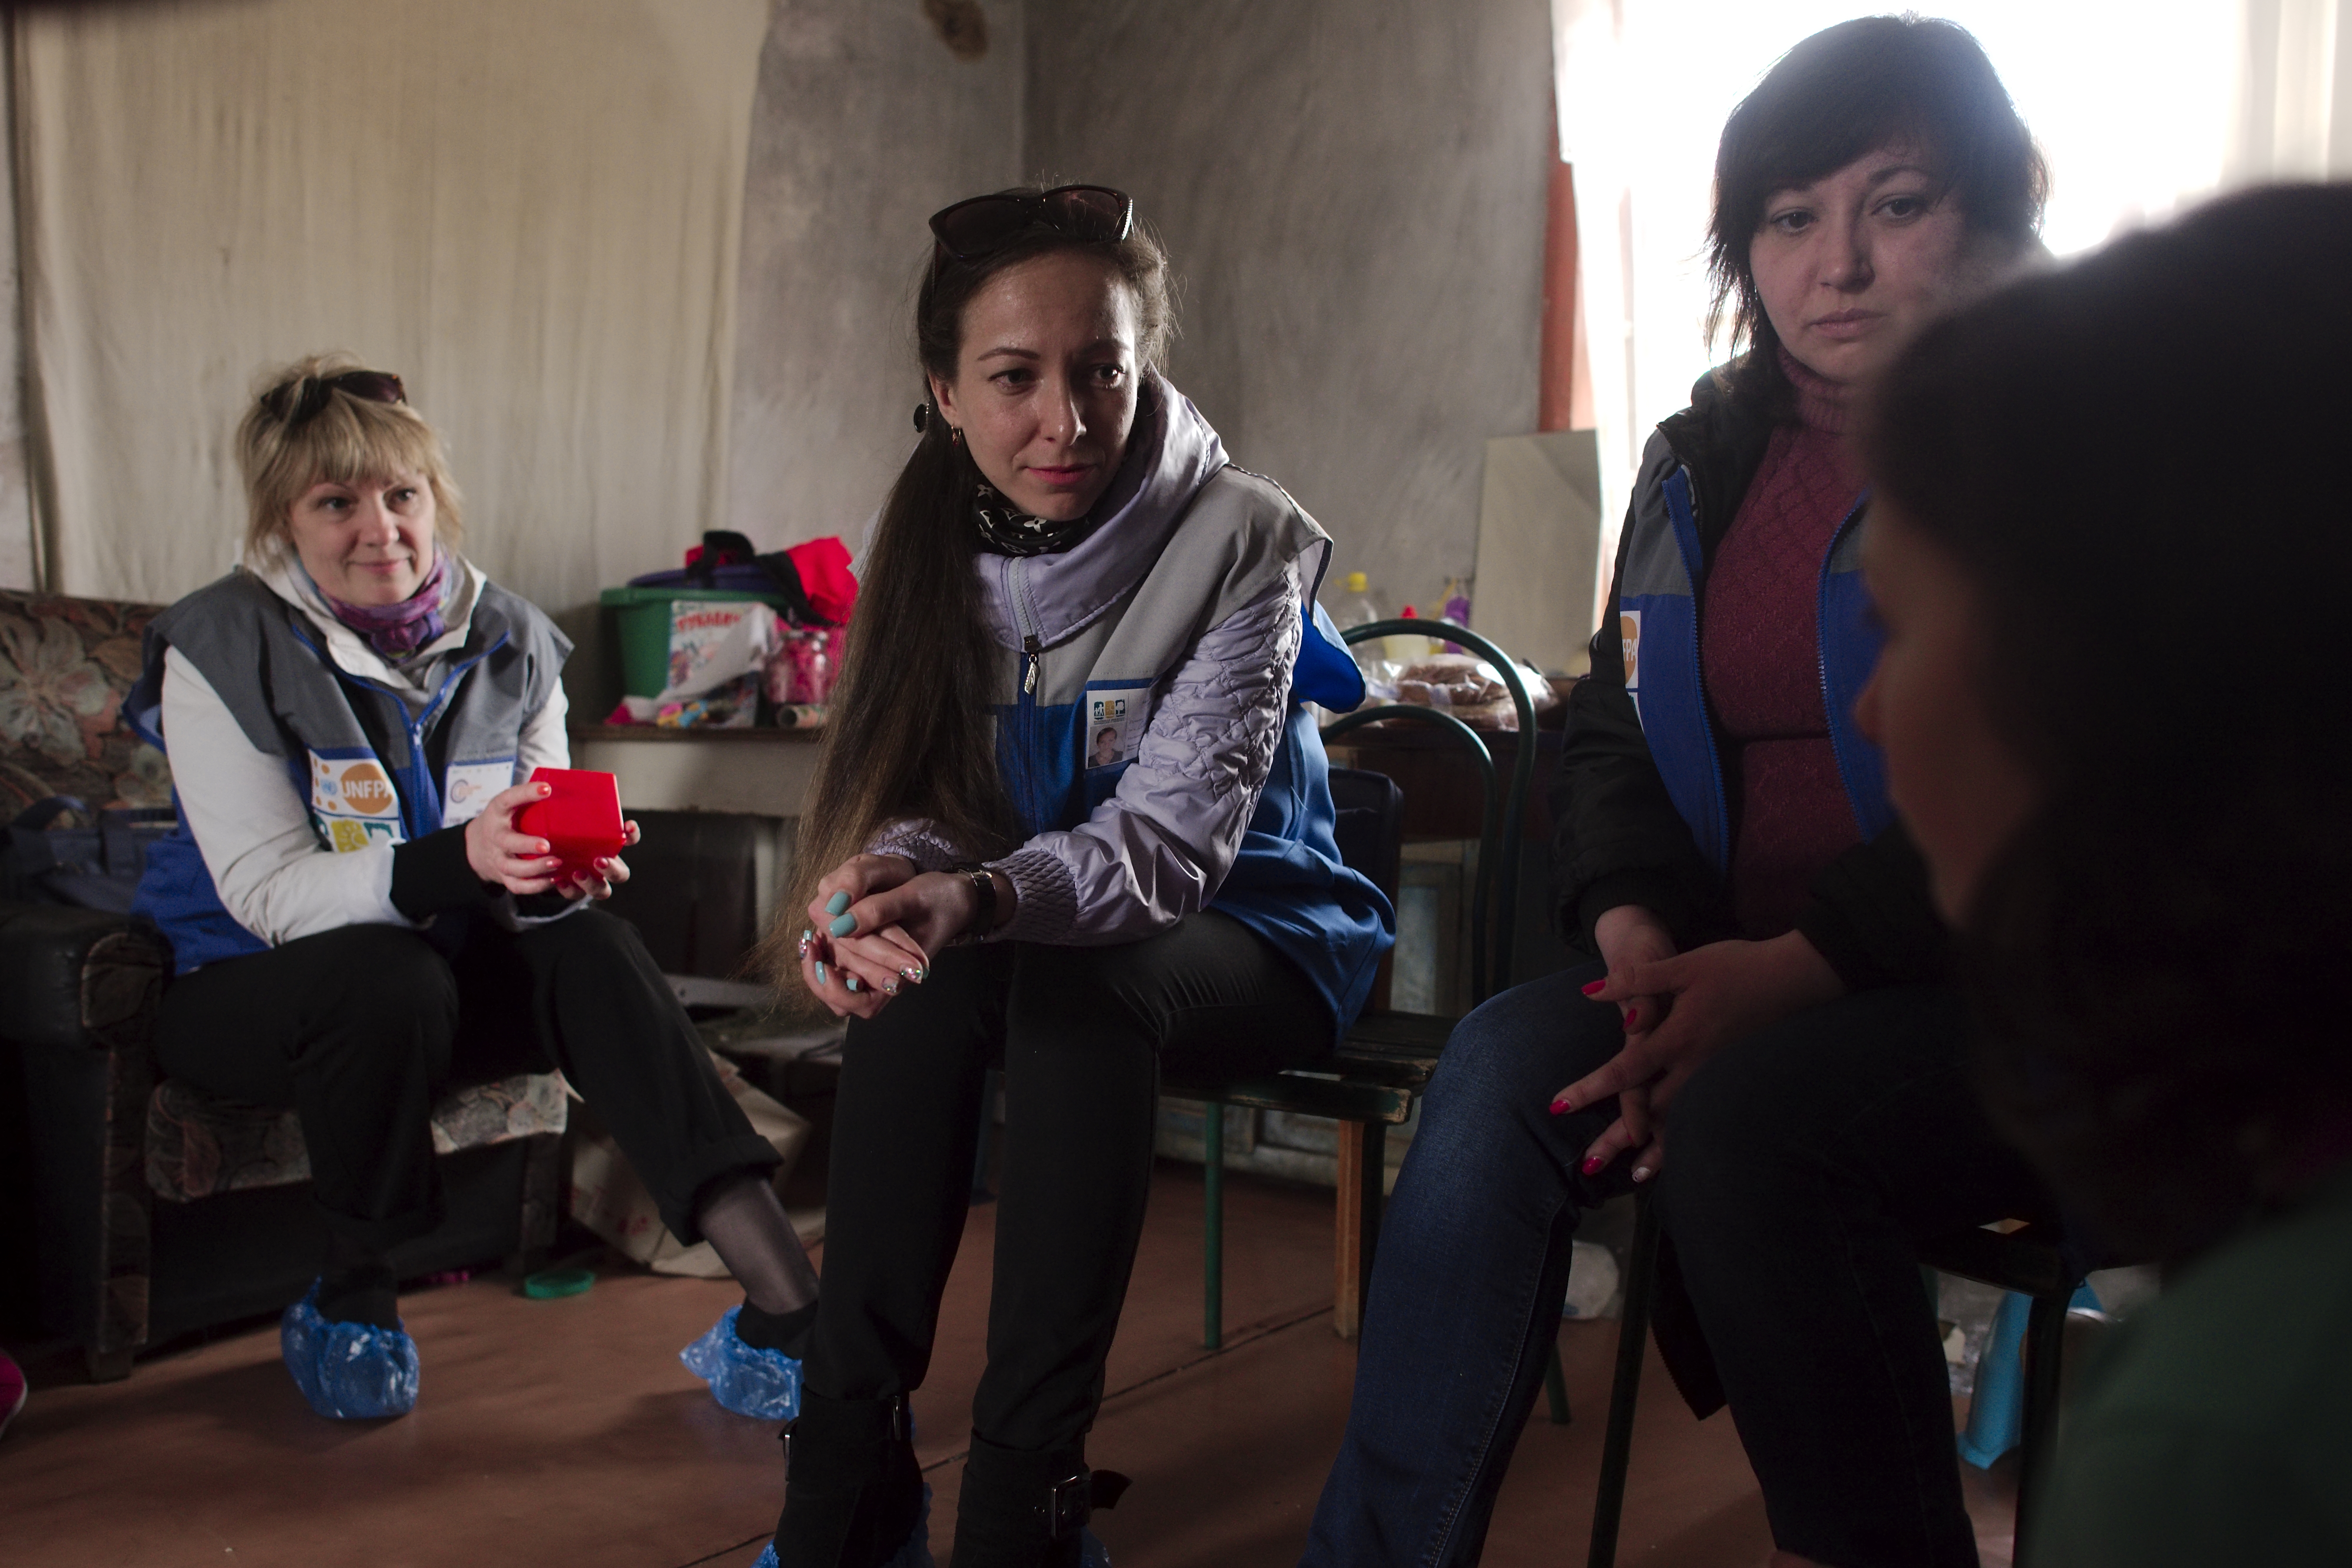 UNFPA will provide social and psychological services to gender-based violence survivors in 12 regions of Ukraine